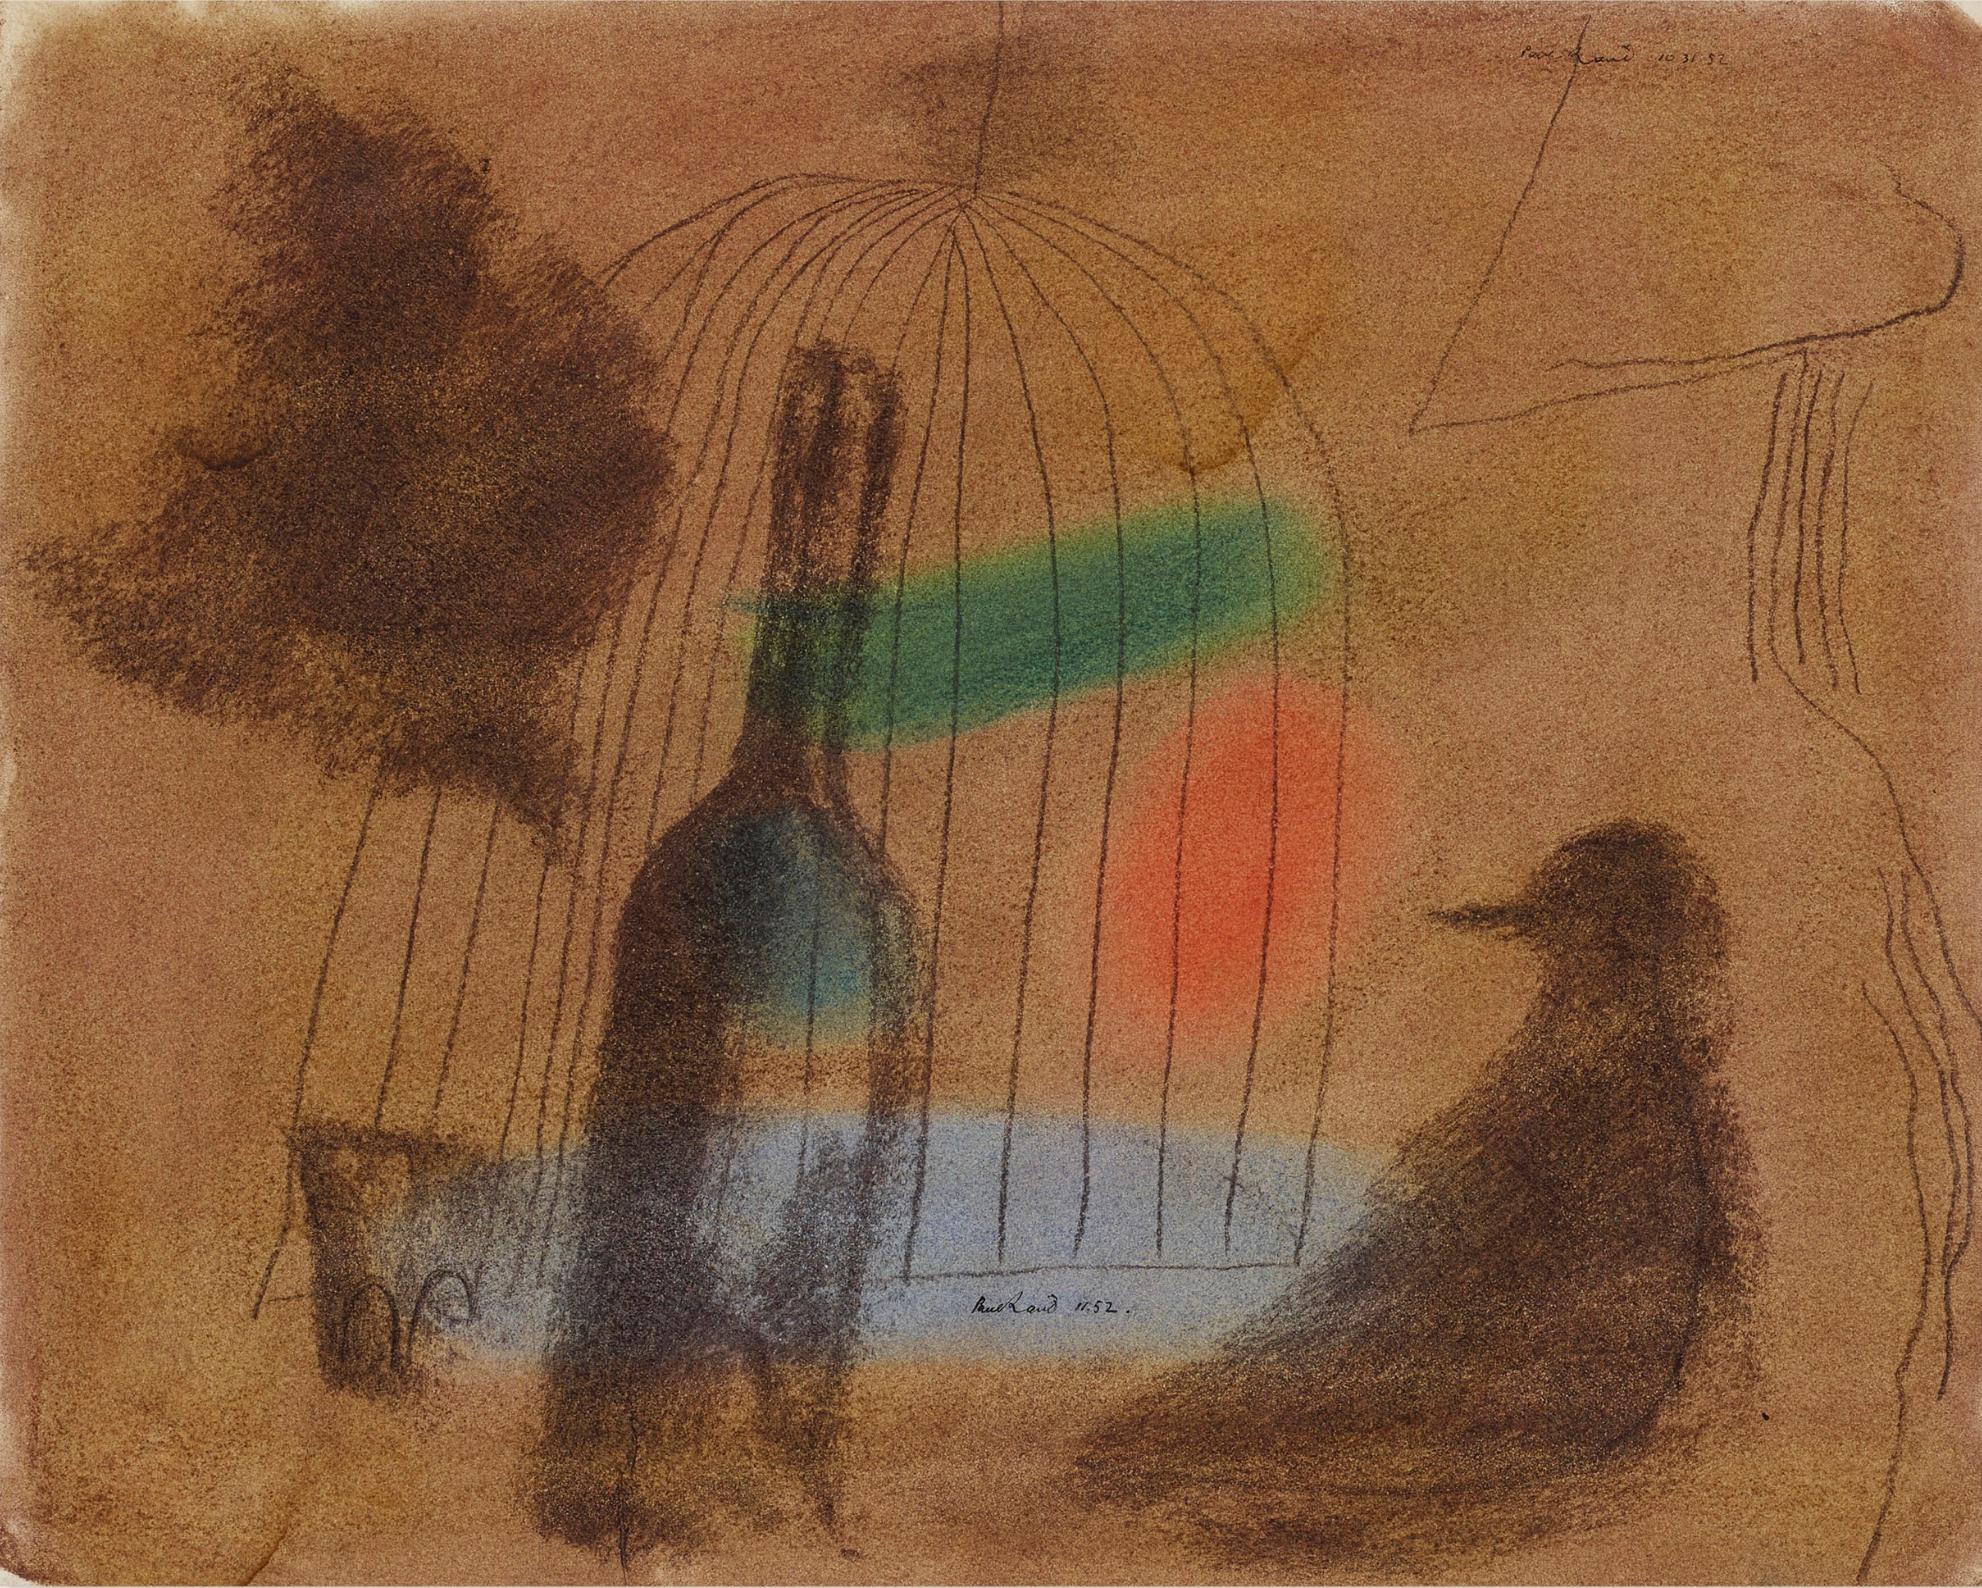 Paul Rand Animal Art - Untitled, Wine Bottle and  Bird outside of a Bird Cage in Moody Brown